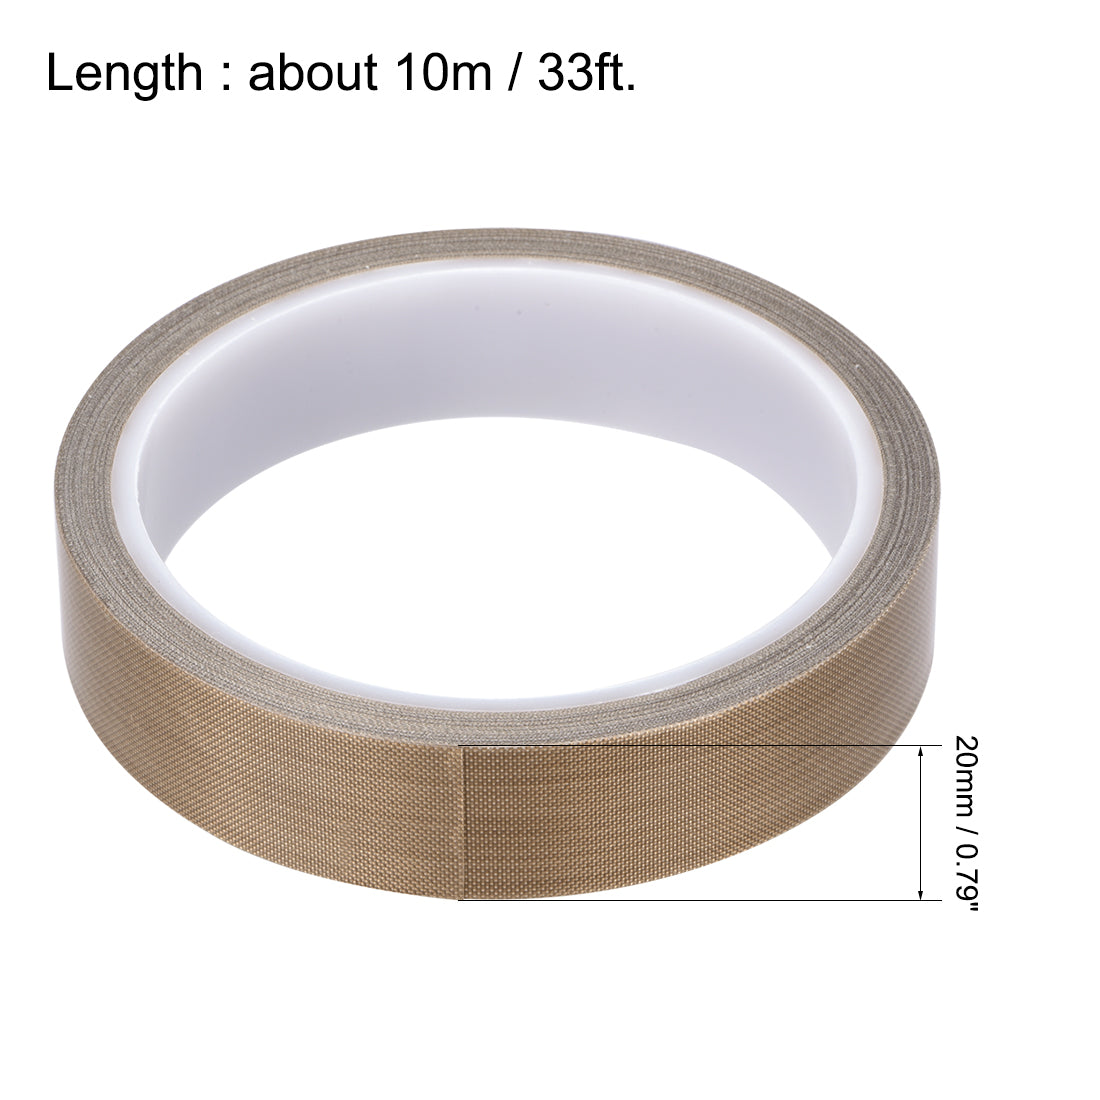 uxcell Uxcell Heat Resistant Tape - High Temperature Heat Transfer Tape PTFE Film Adhesive Tape 20mm x 10m(33ft)